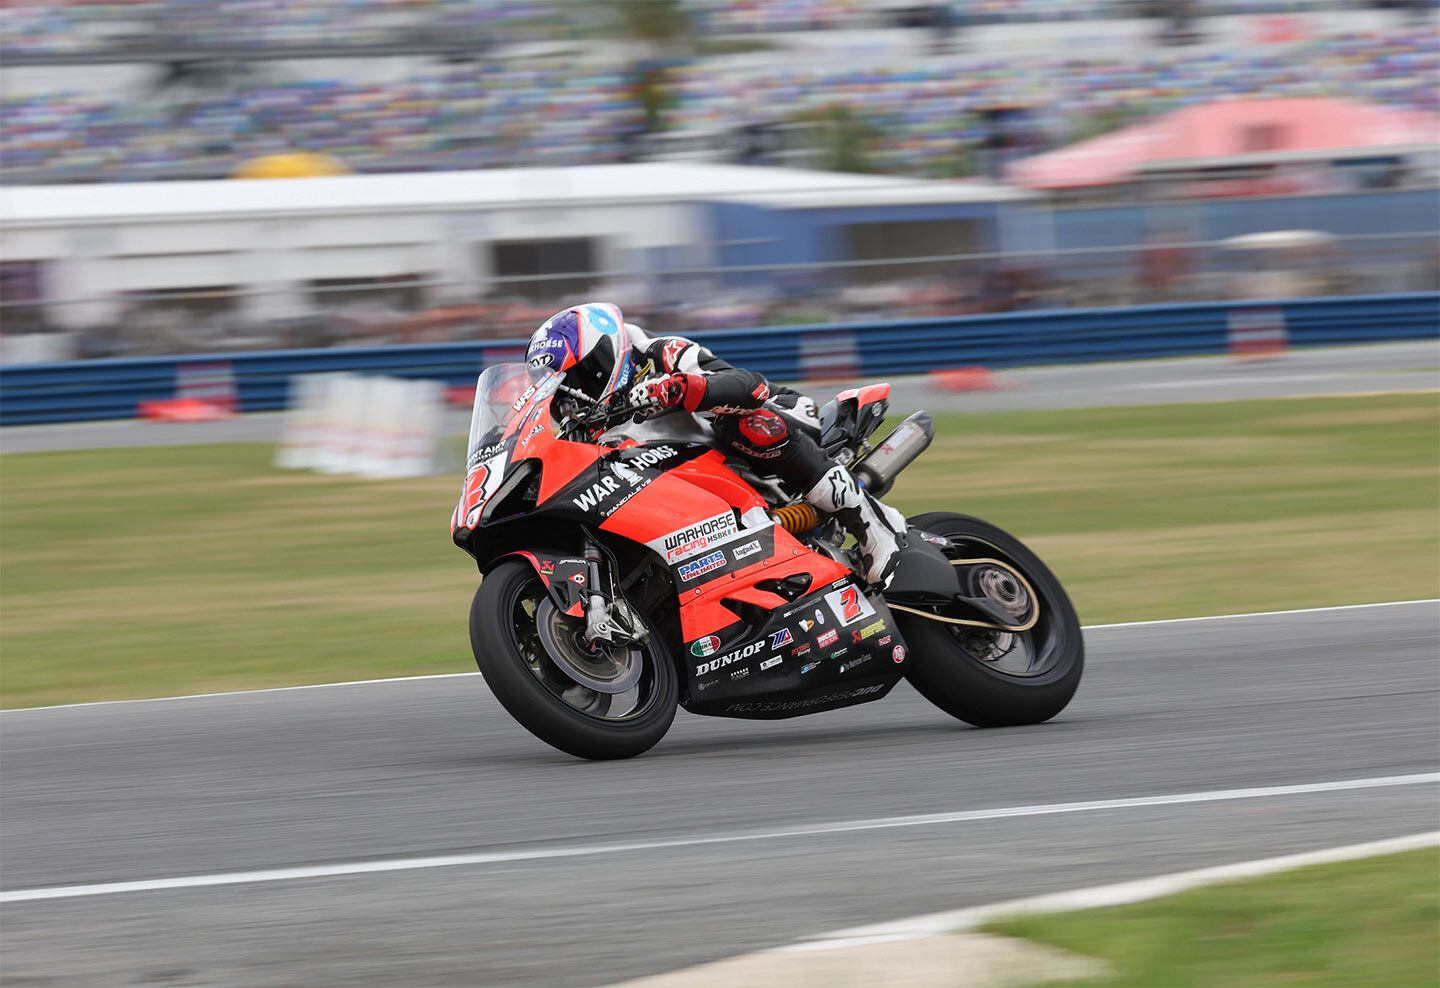 Herrin rode his Ducati Panigale V2 again at Daytona this year. The Warhorse HSBK Racing rider won the 200 last year as well as back in 2010, making him the sixth three-time winner of the Daytona 200, joining the likes of Kenny Roberts and Mat Mladin in that rarified group.